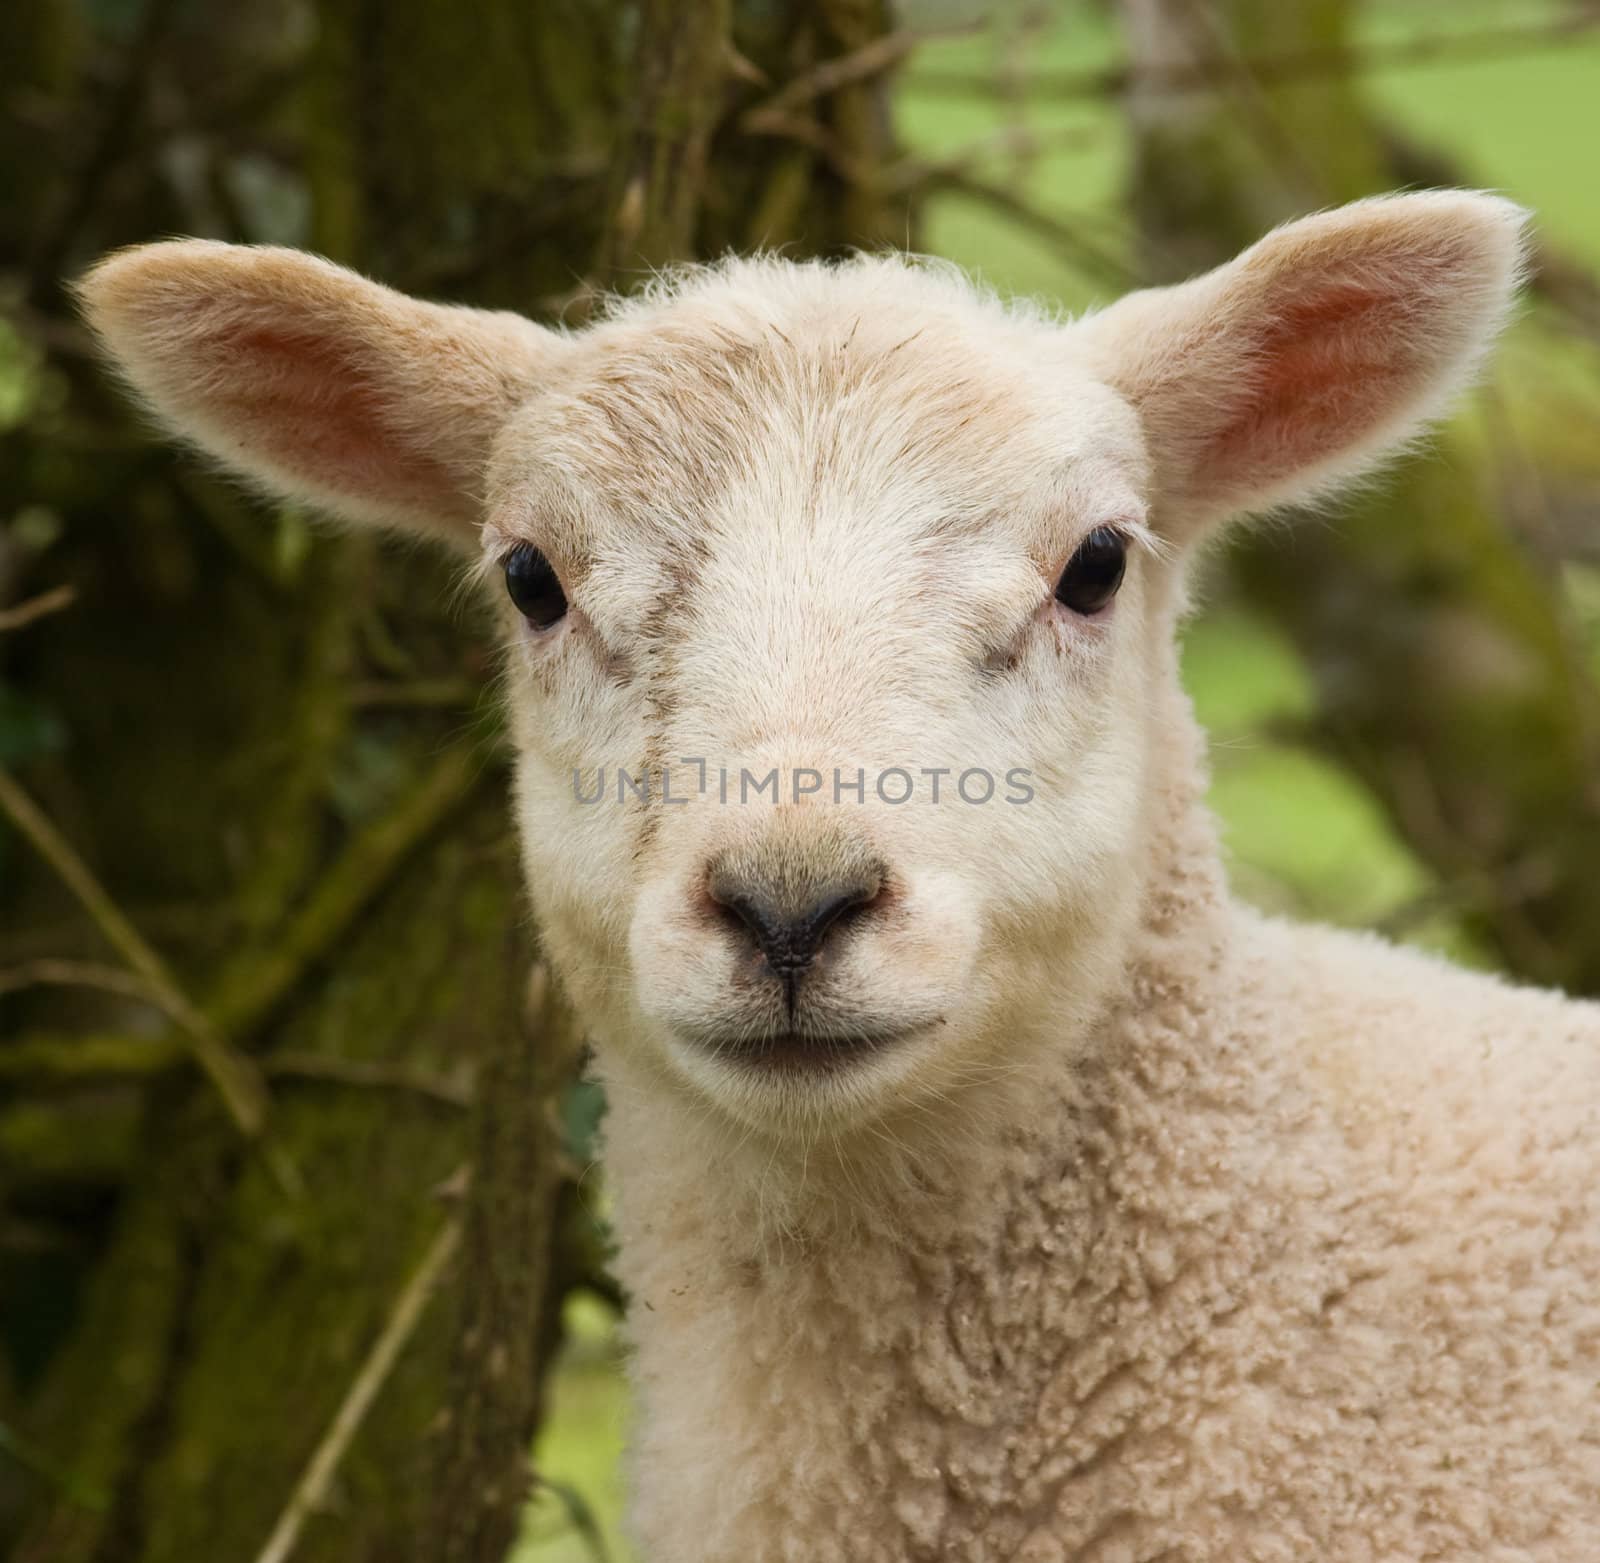 a portrait image of a very young spring lamb with blurred background.